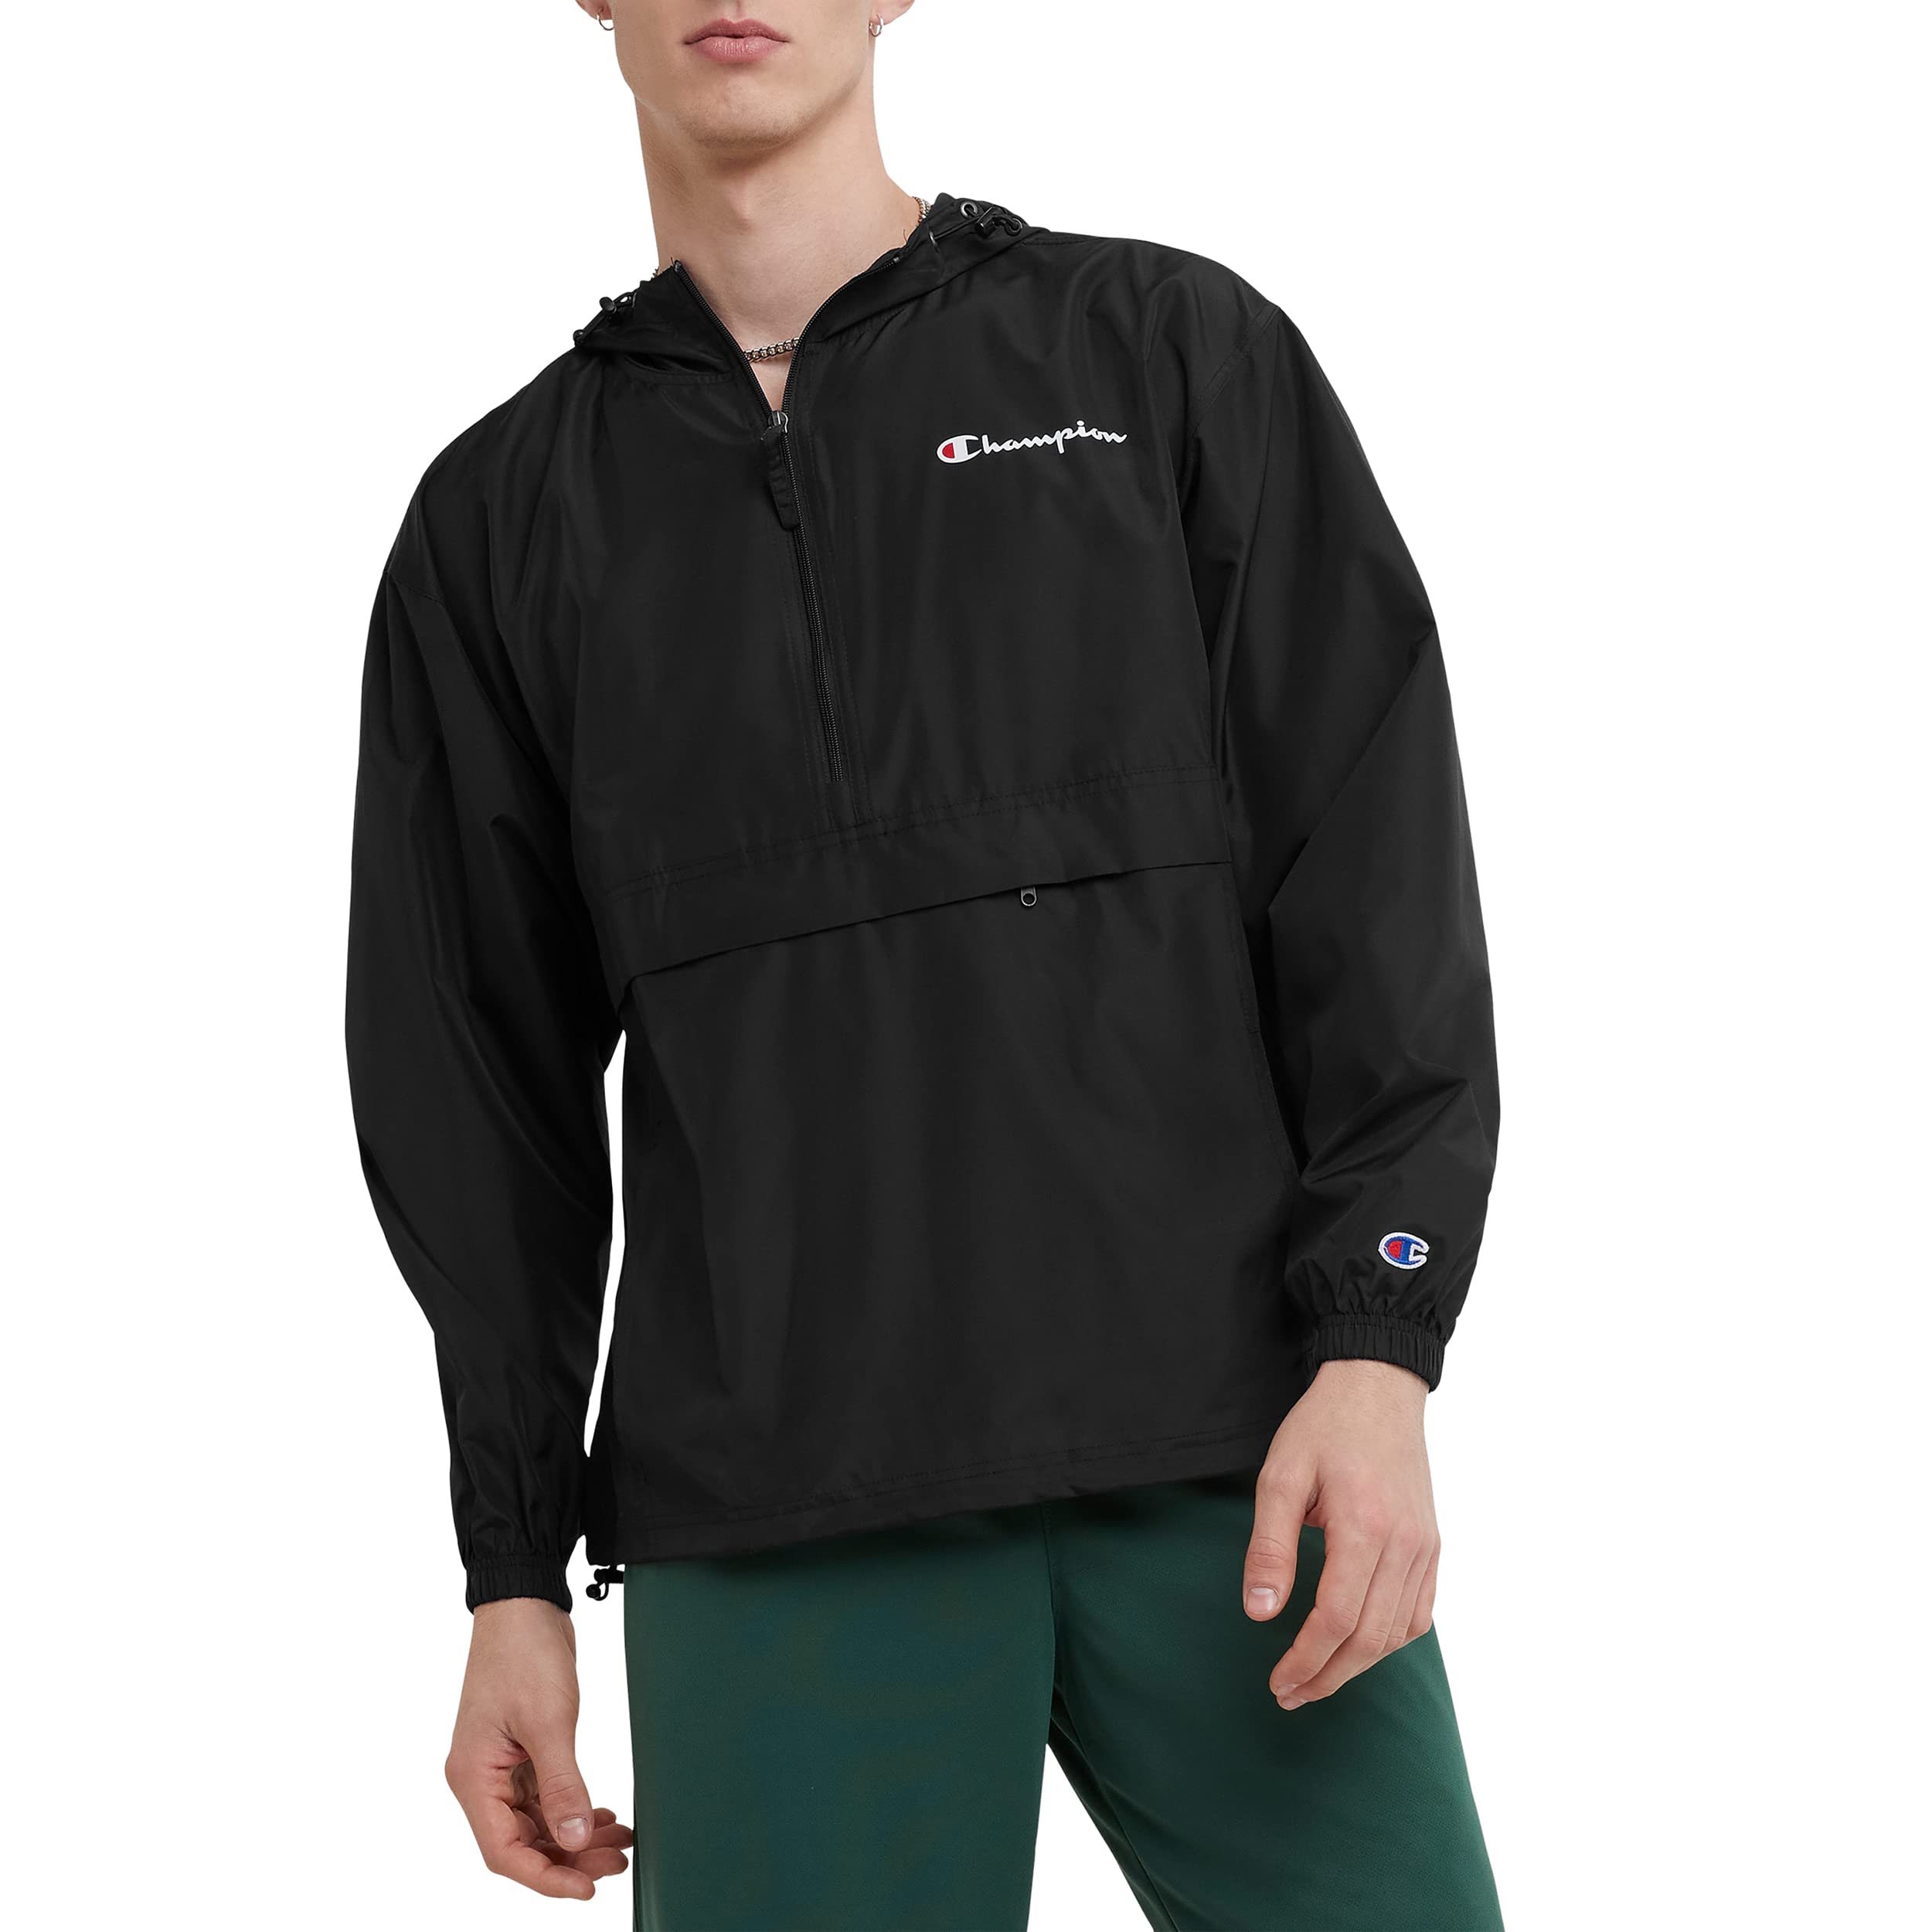 Champion Men's Jacket, Stadium Packable Wind and Water Resistant Jacket (Reg. or Big & Tall)